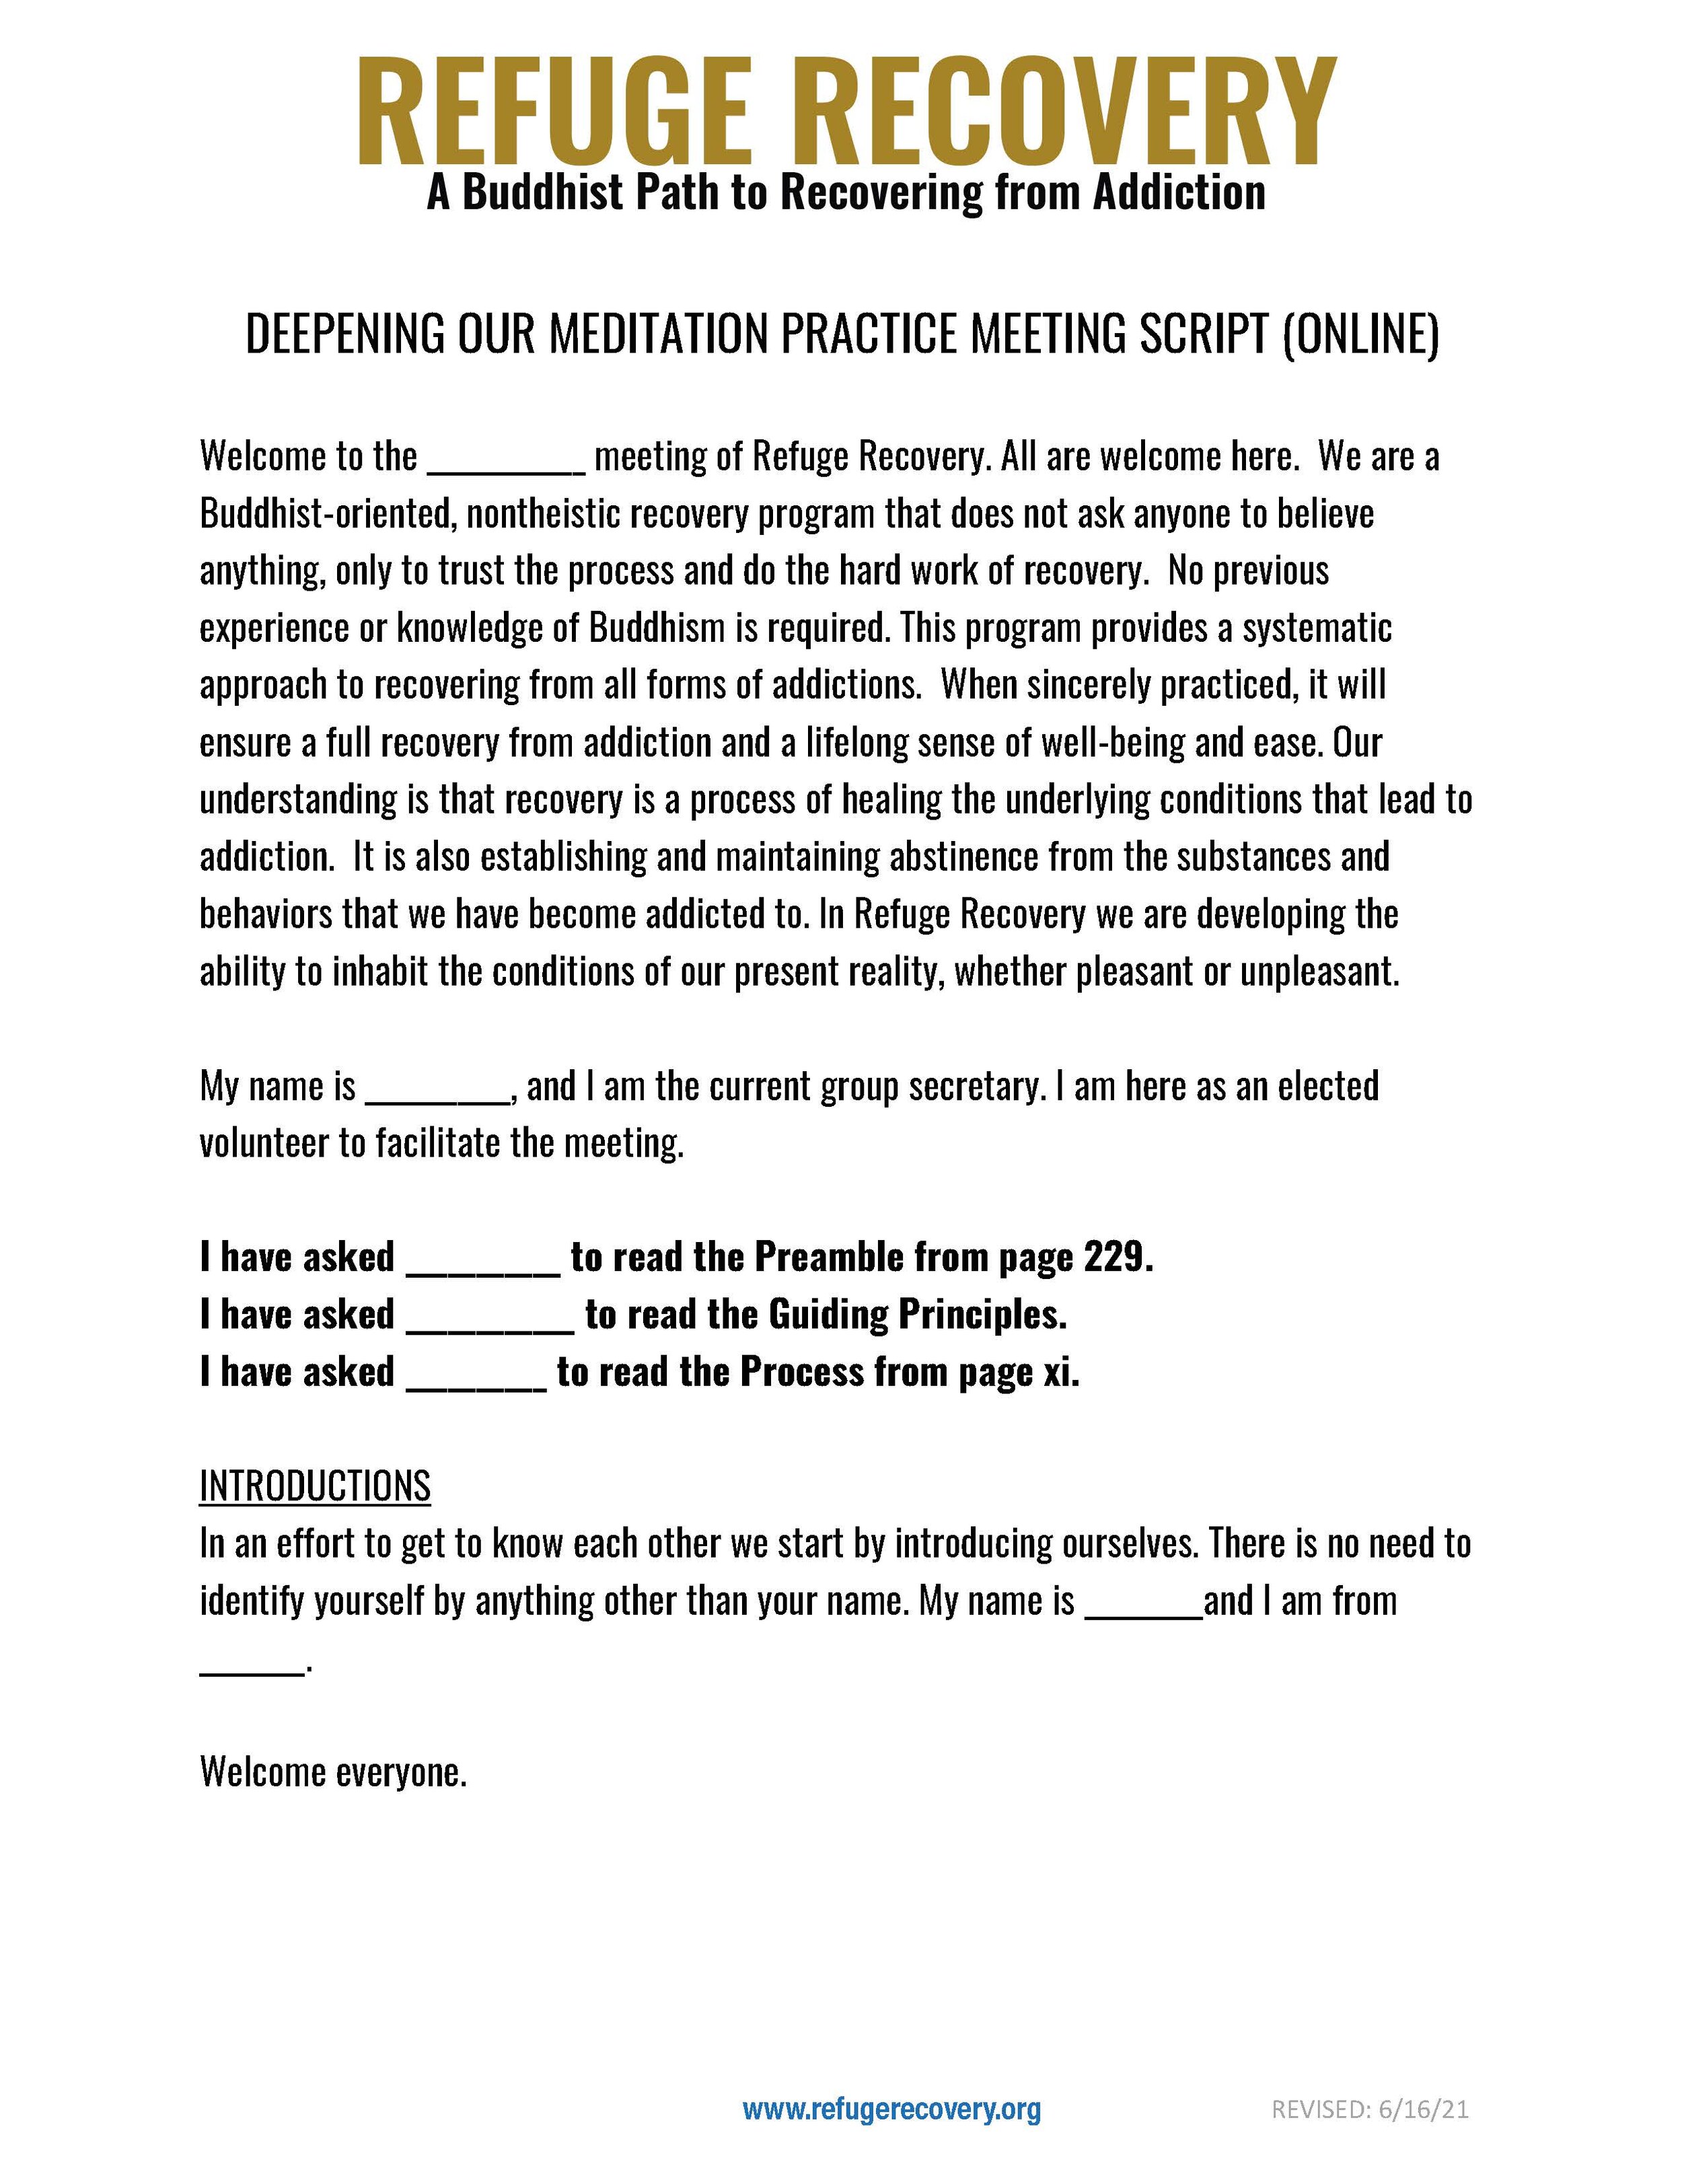 ALL IN-PERSON MEETING SCRIPTS_Page_05.jpg